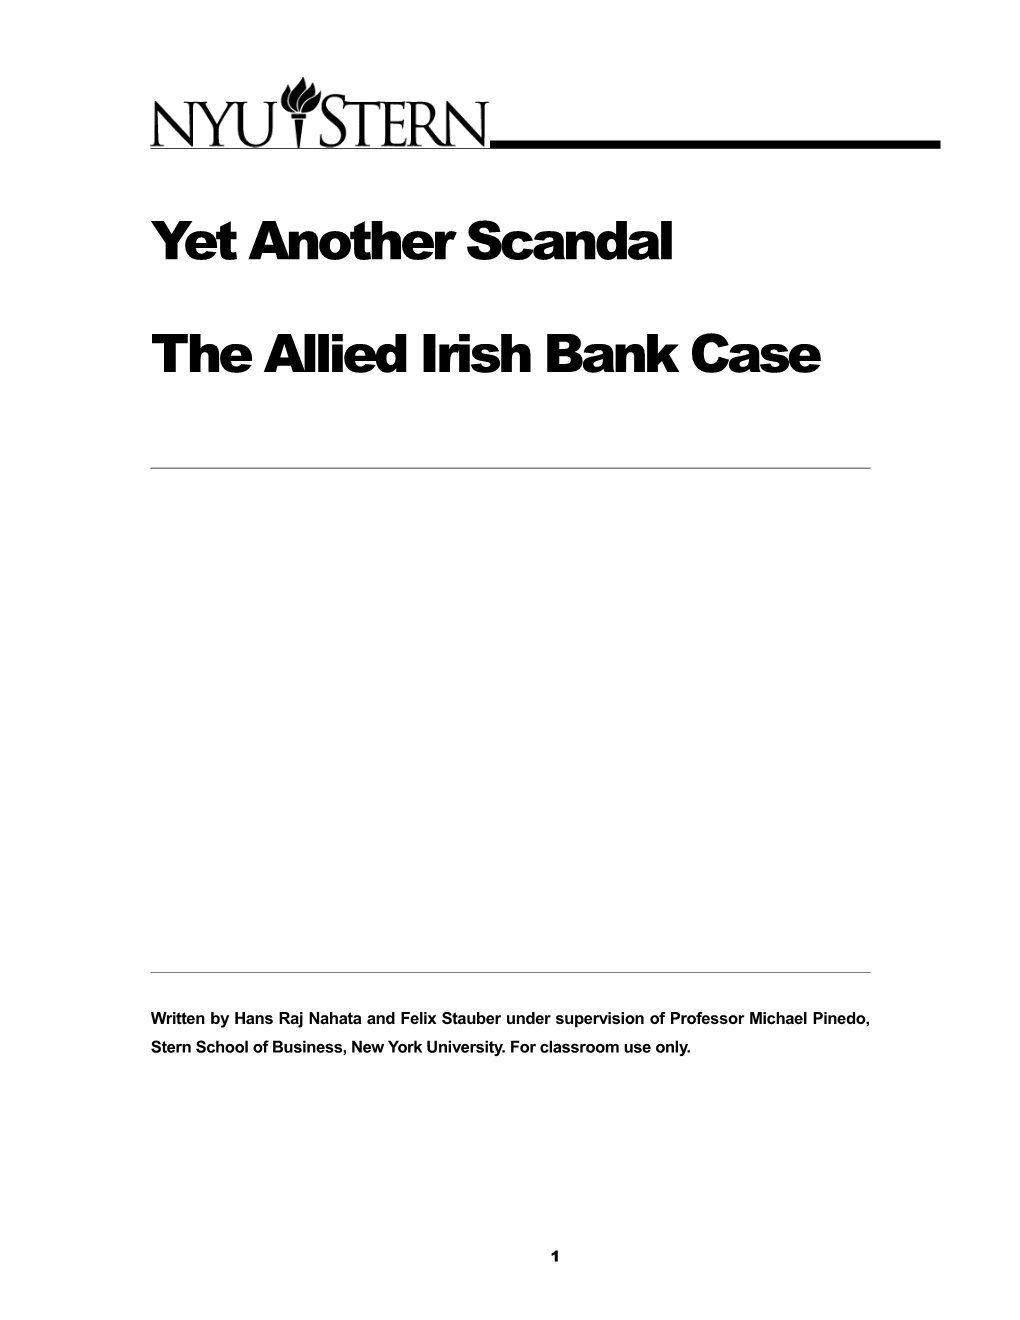 Yet Another Scandal the Allied Irish Bank Case